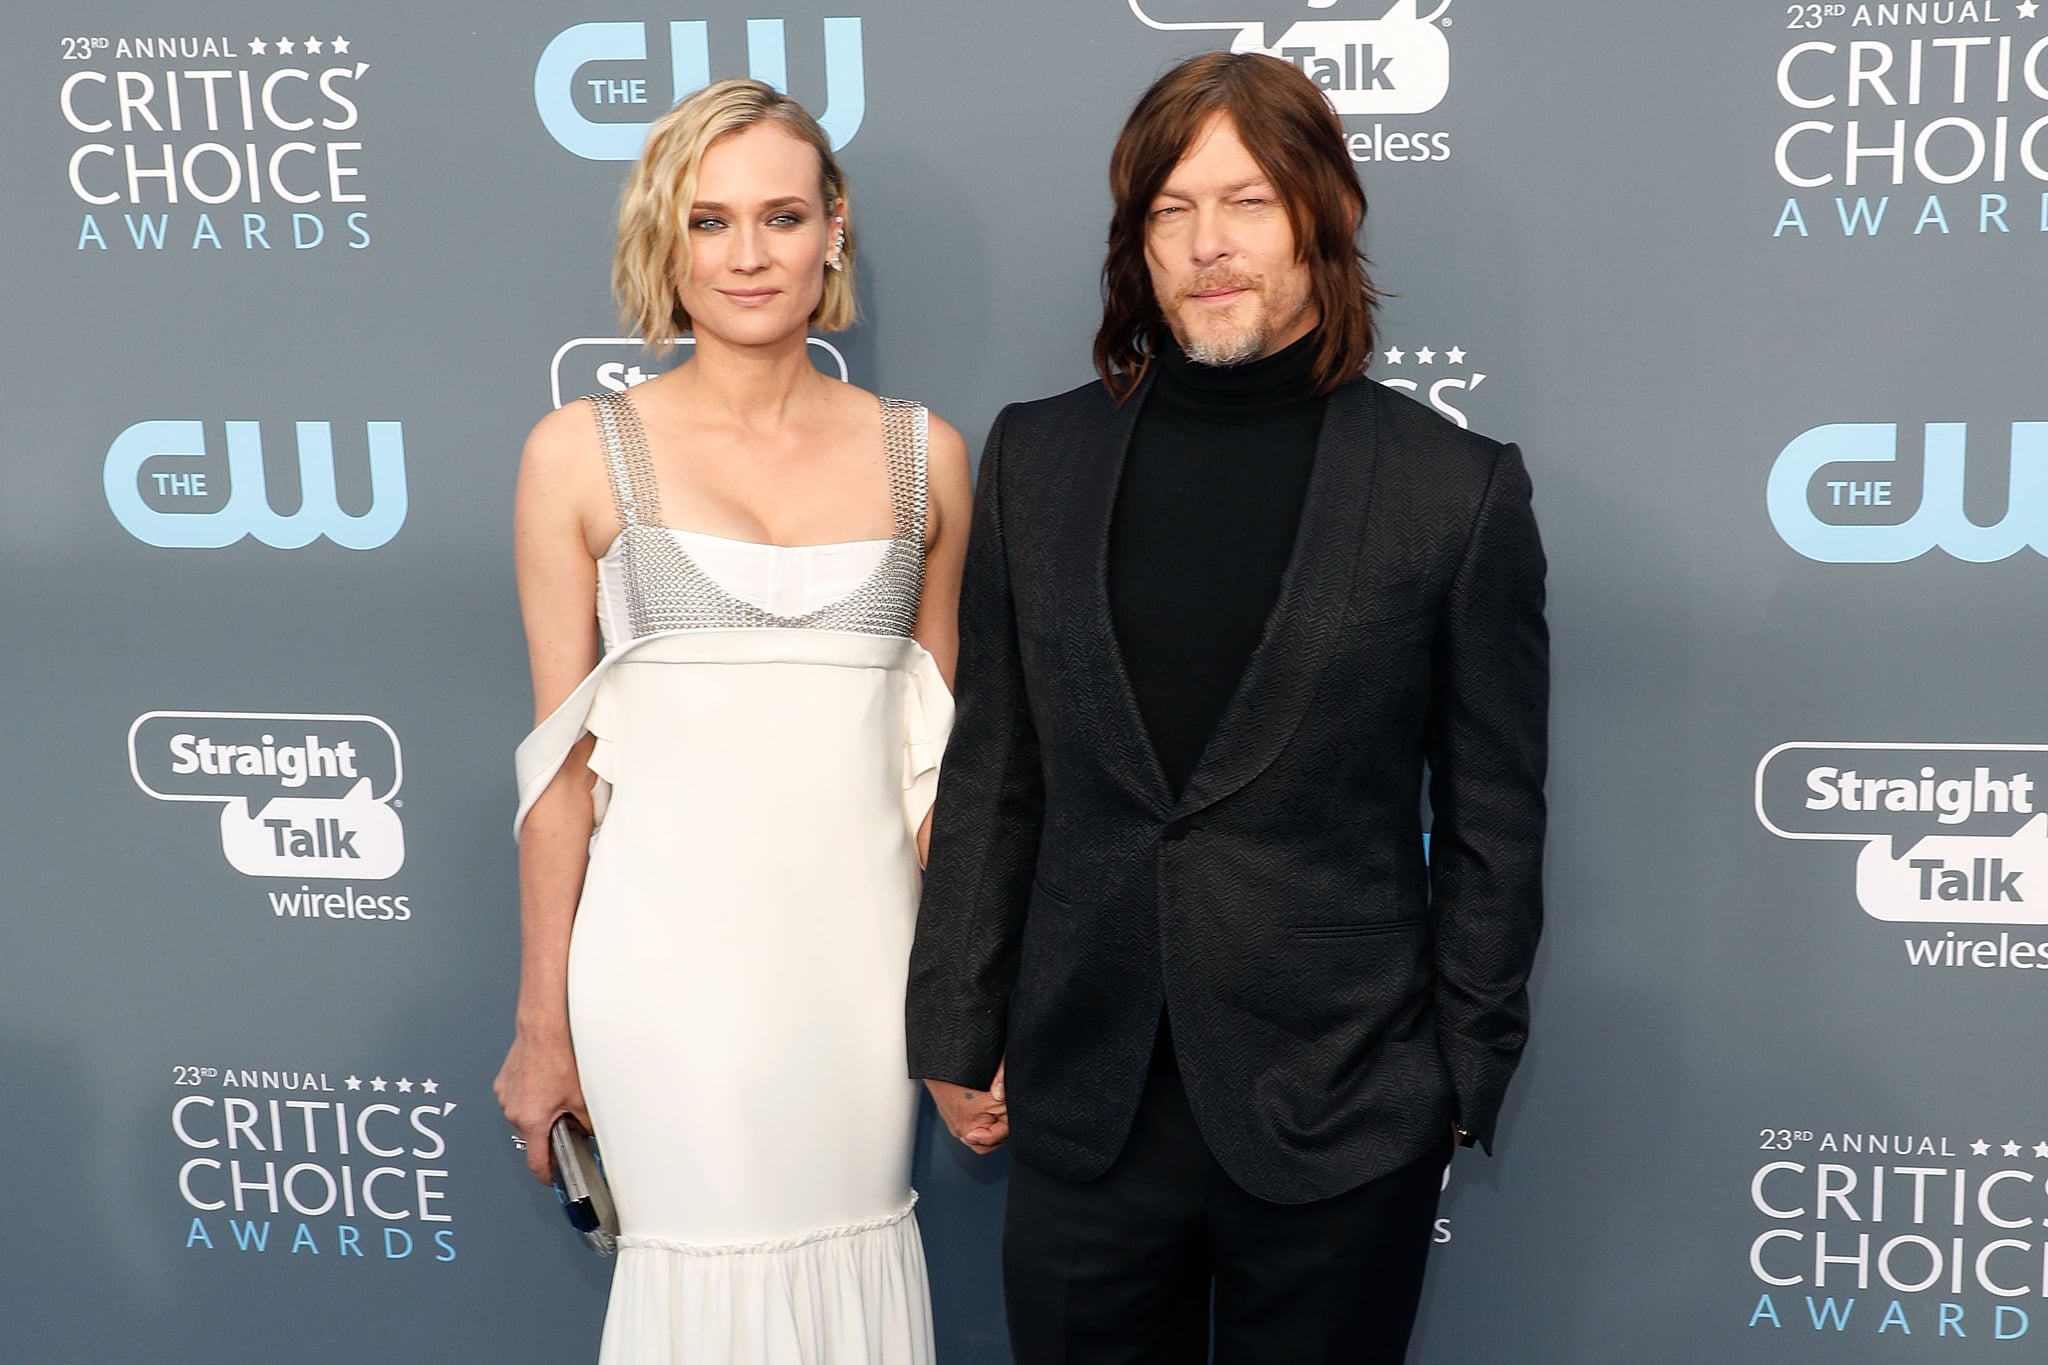 SANTA MONICA, CA - JANUARY 11:  Diane Kruger and Norman Reedus attend the 23rd Annual Critics' Choice Awards at Barker Hangar on January 11, 2018 in Santa Monica, California.  (Photo by Taylor Hill/Getty Images)